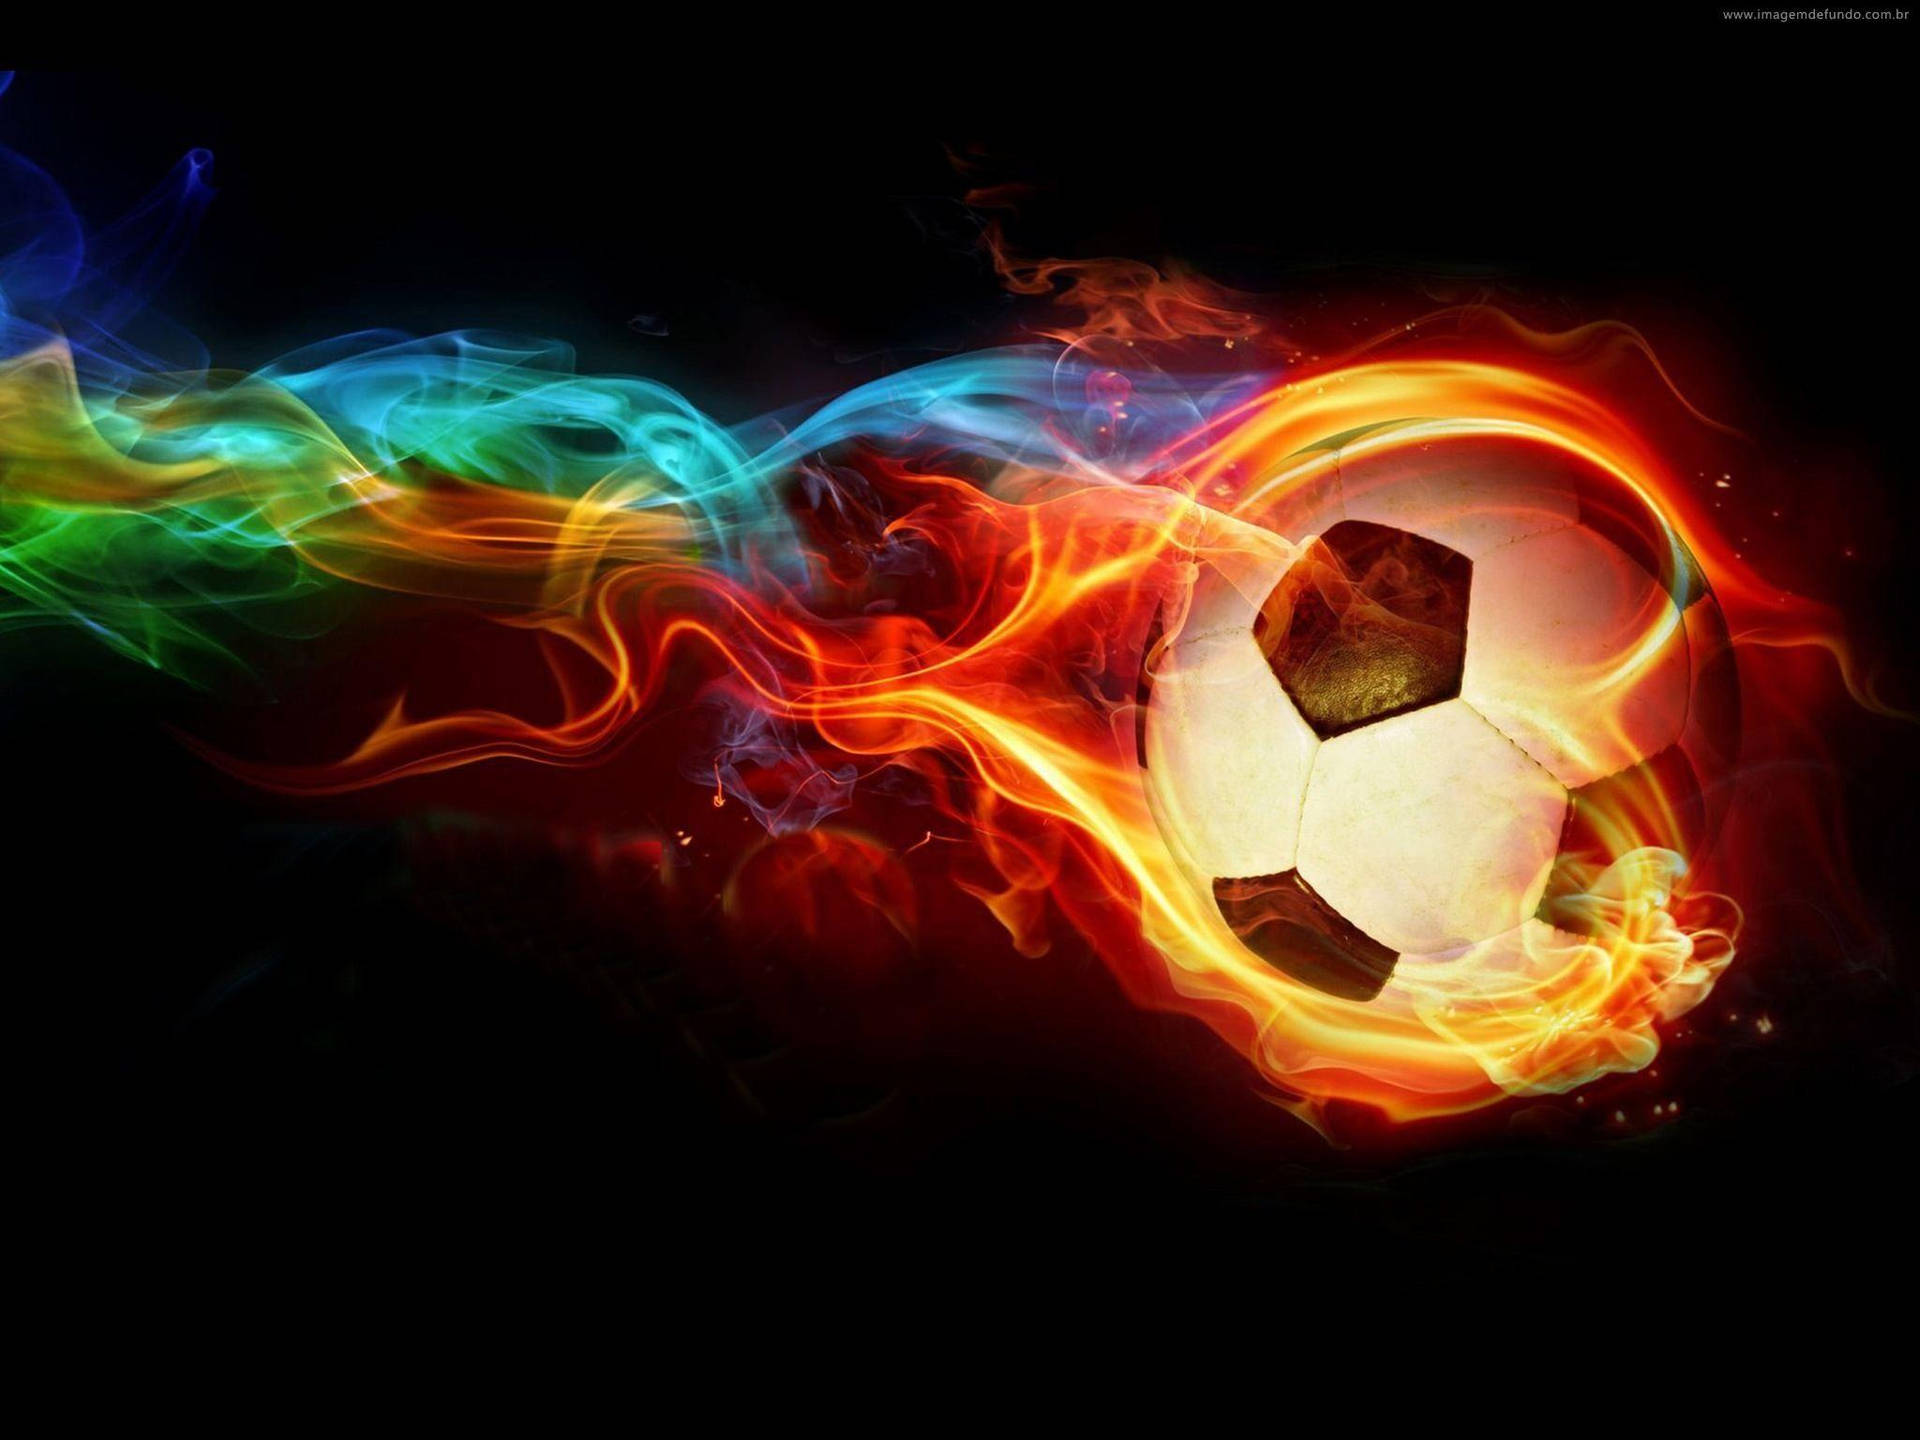 Fiery Soccer Ball In Action Background